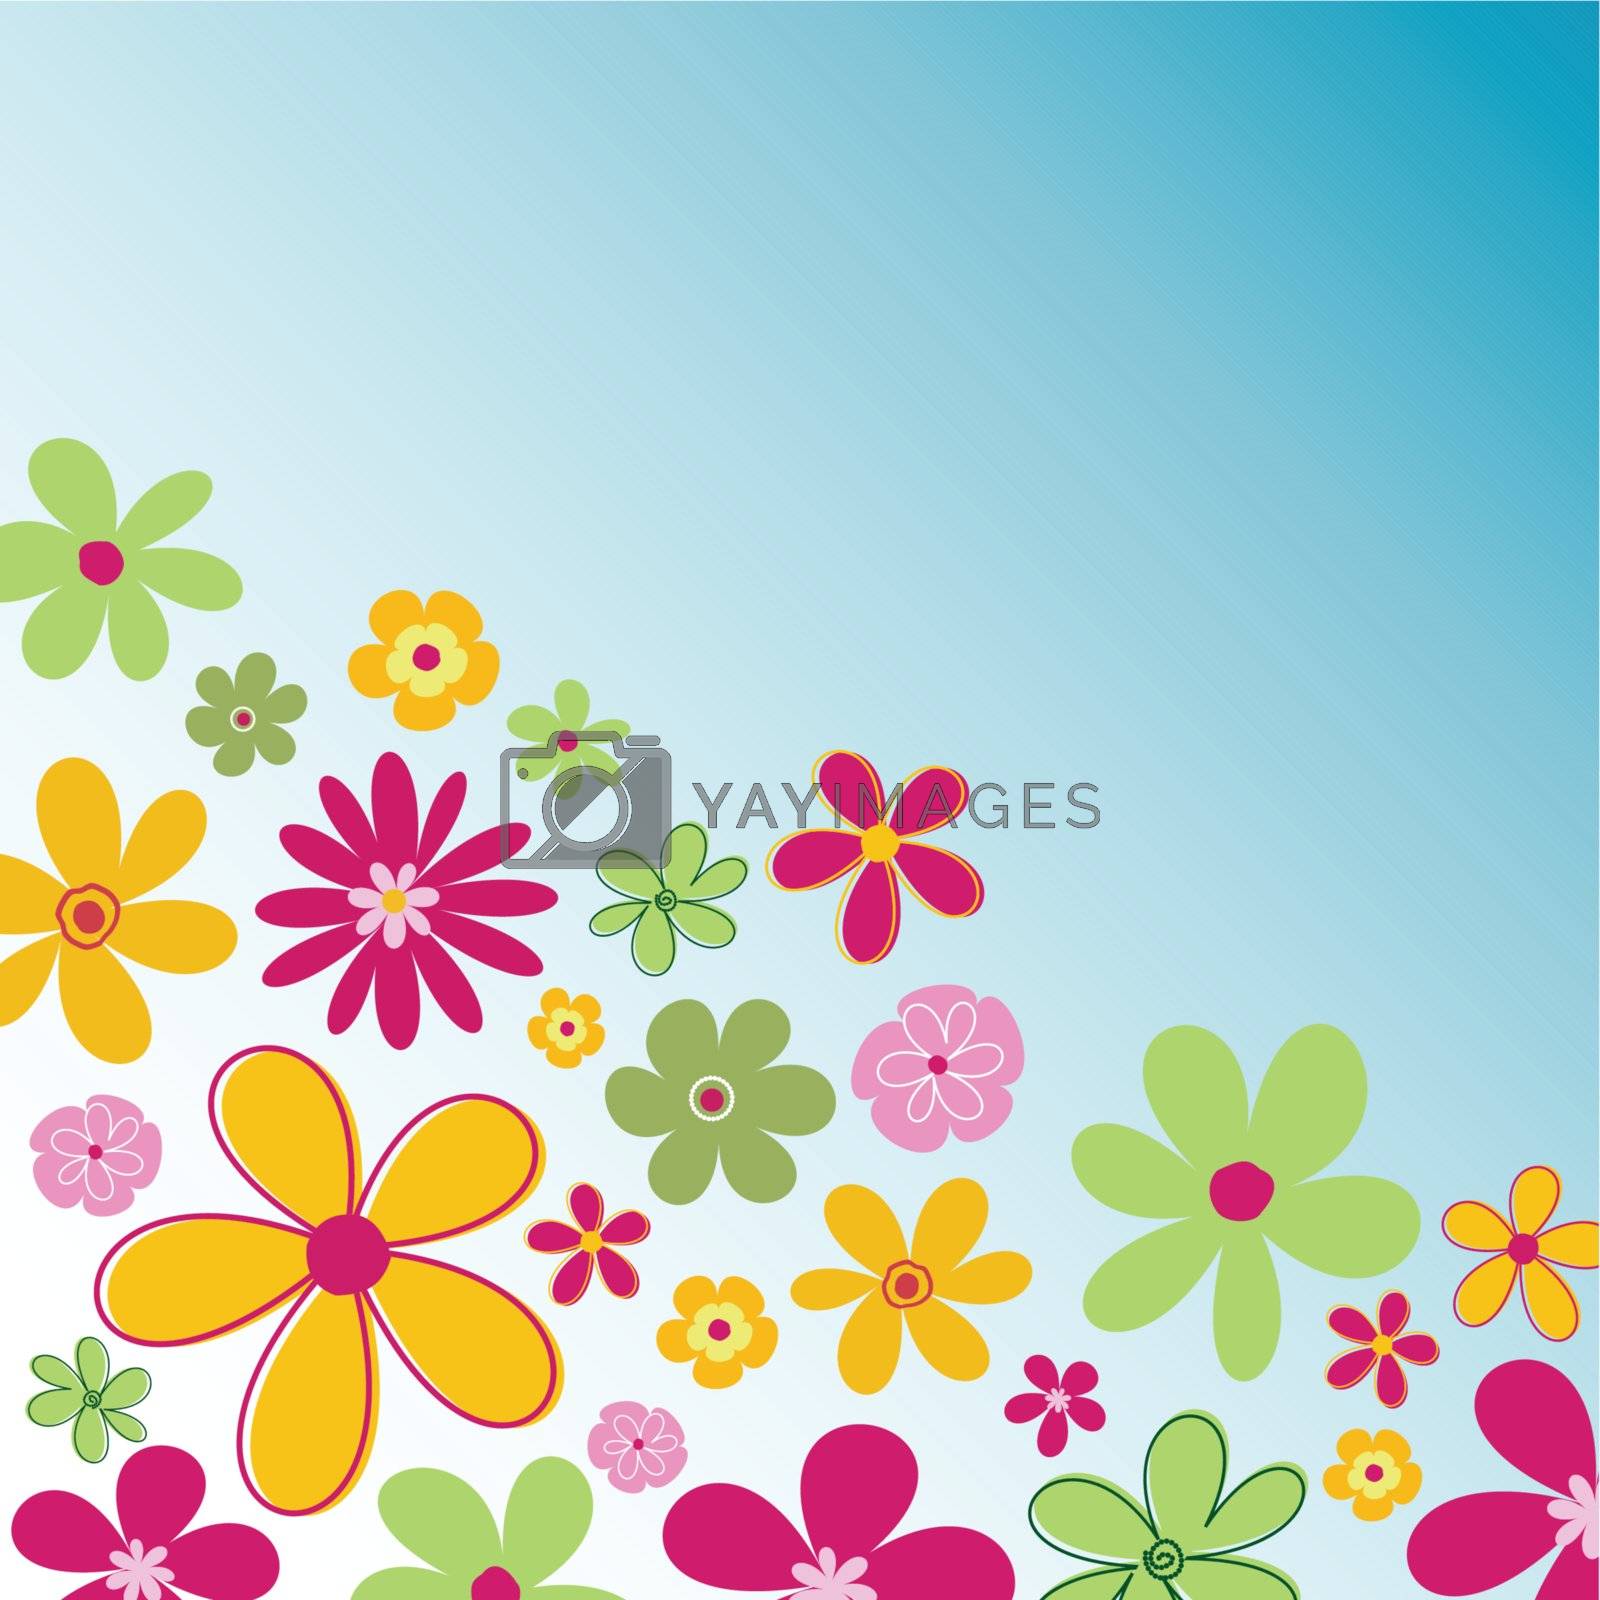 Royalty free image of Floral abstract background by kjpargeter